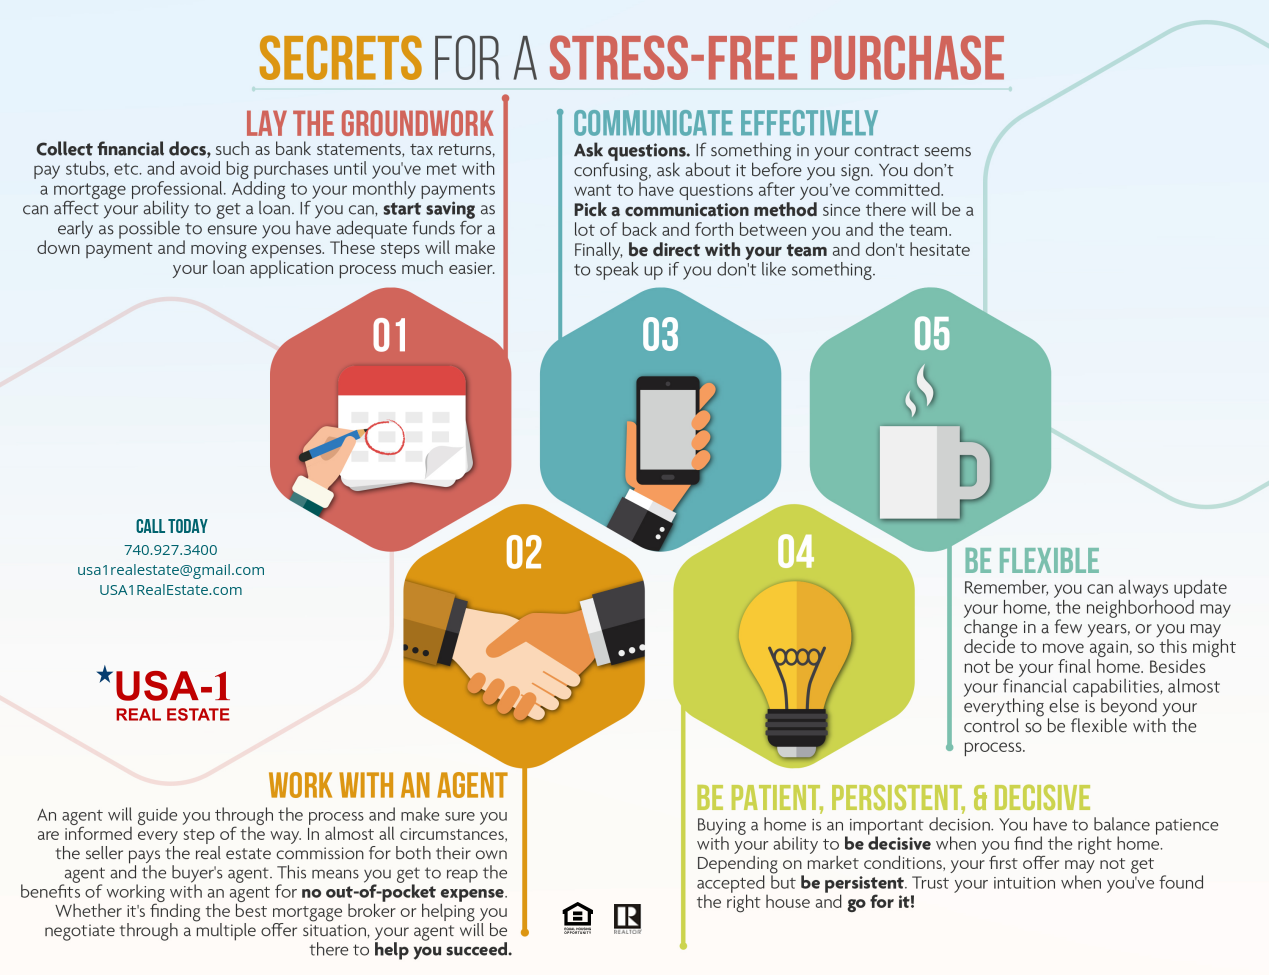 Secrets for a Stress-Free Purchase